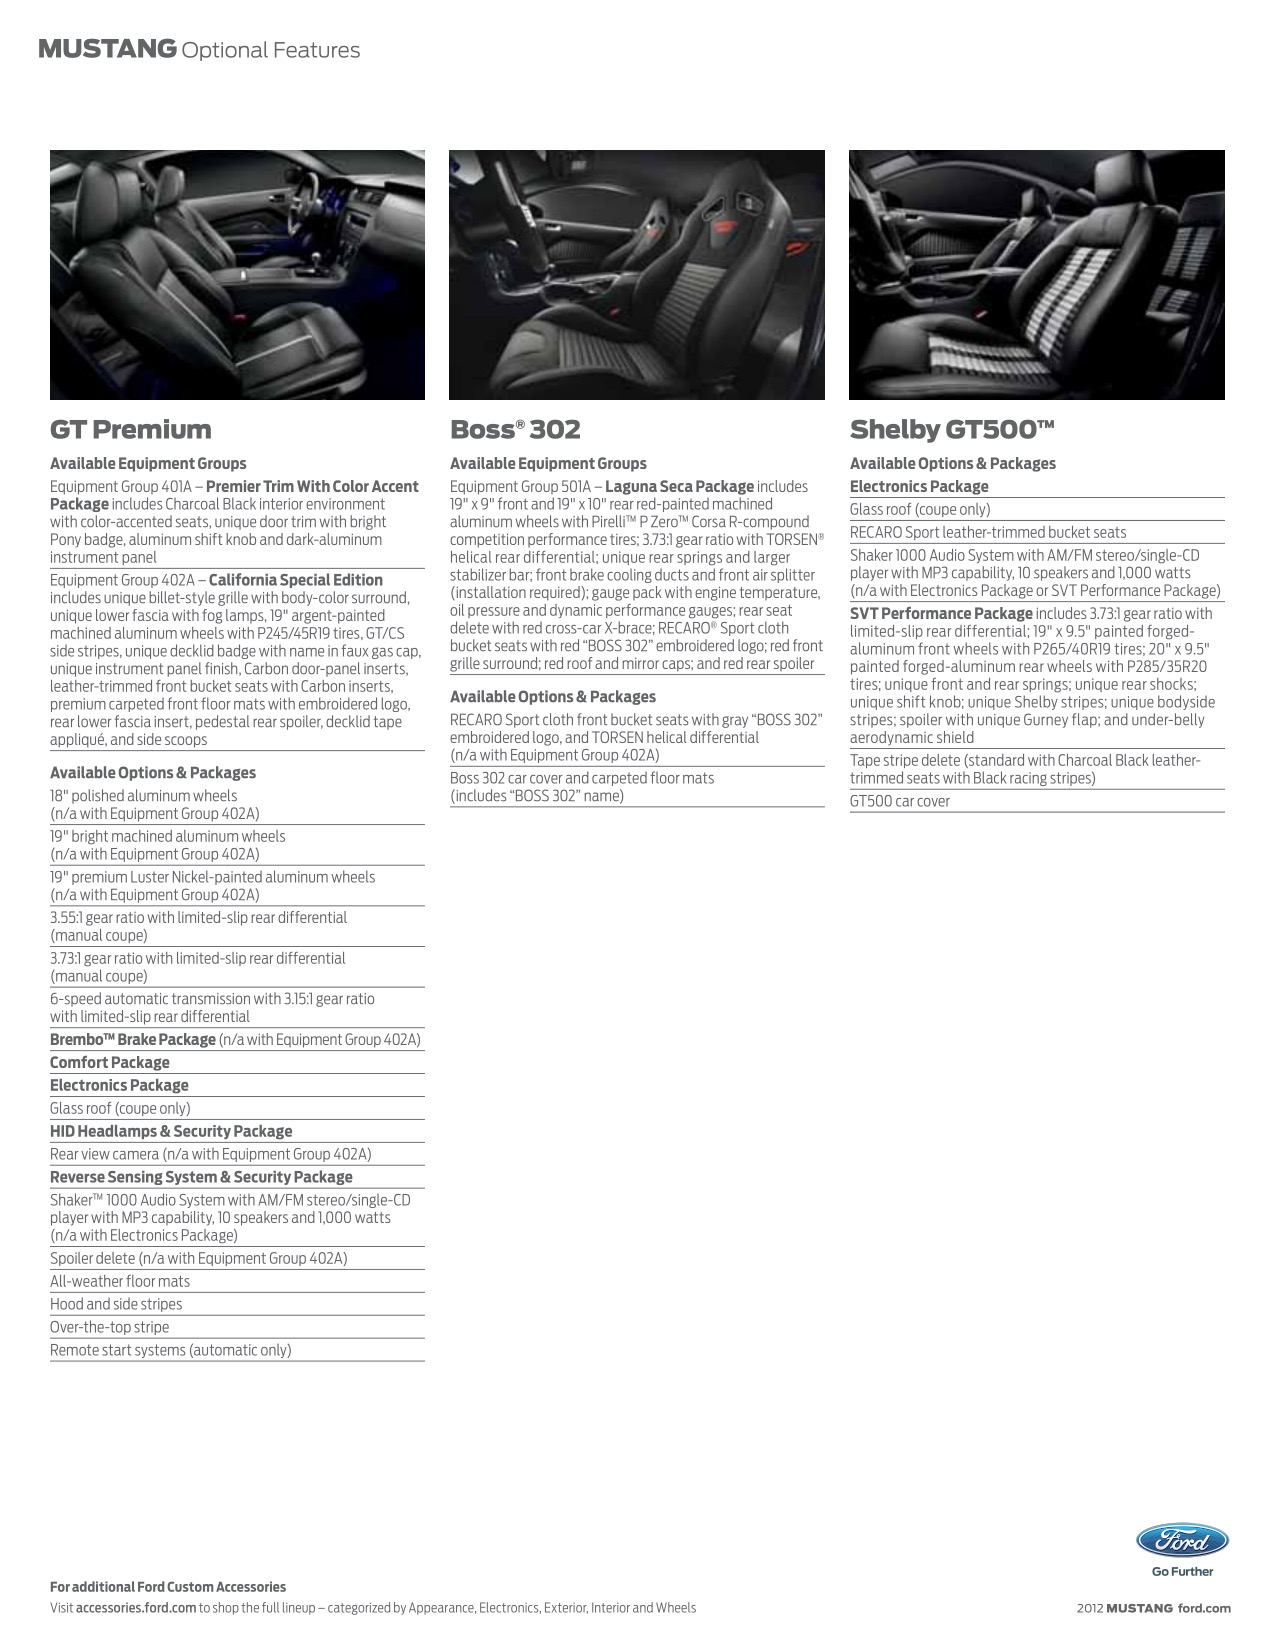 2012 Ford Mustang Brochure Page 4